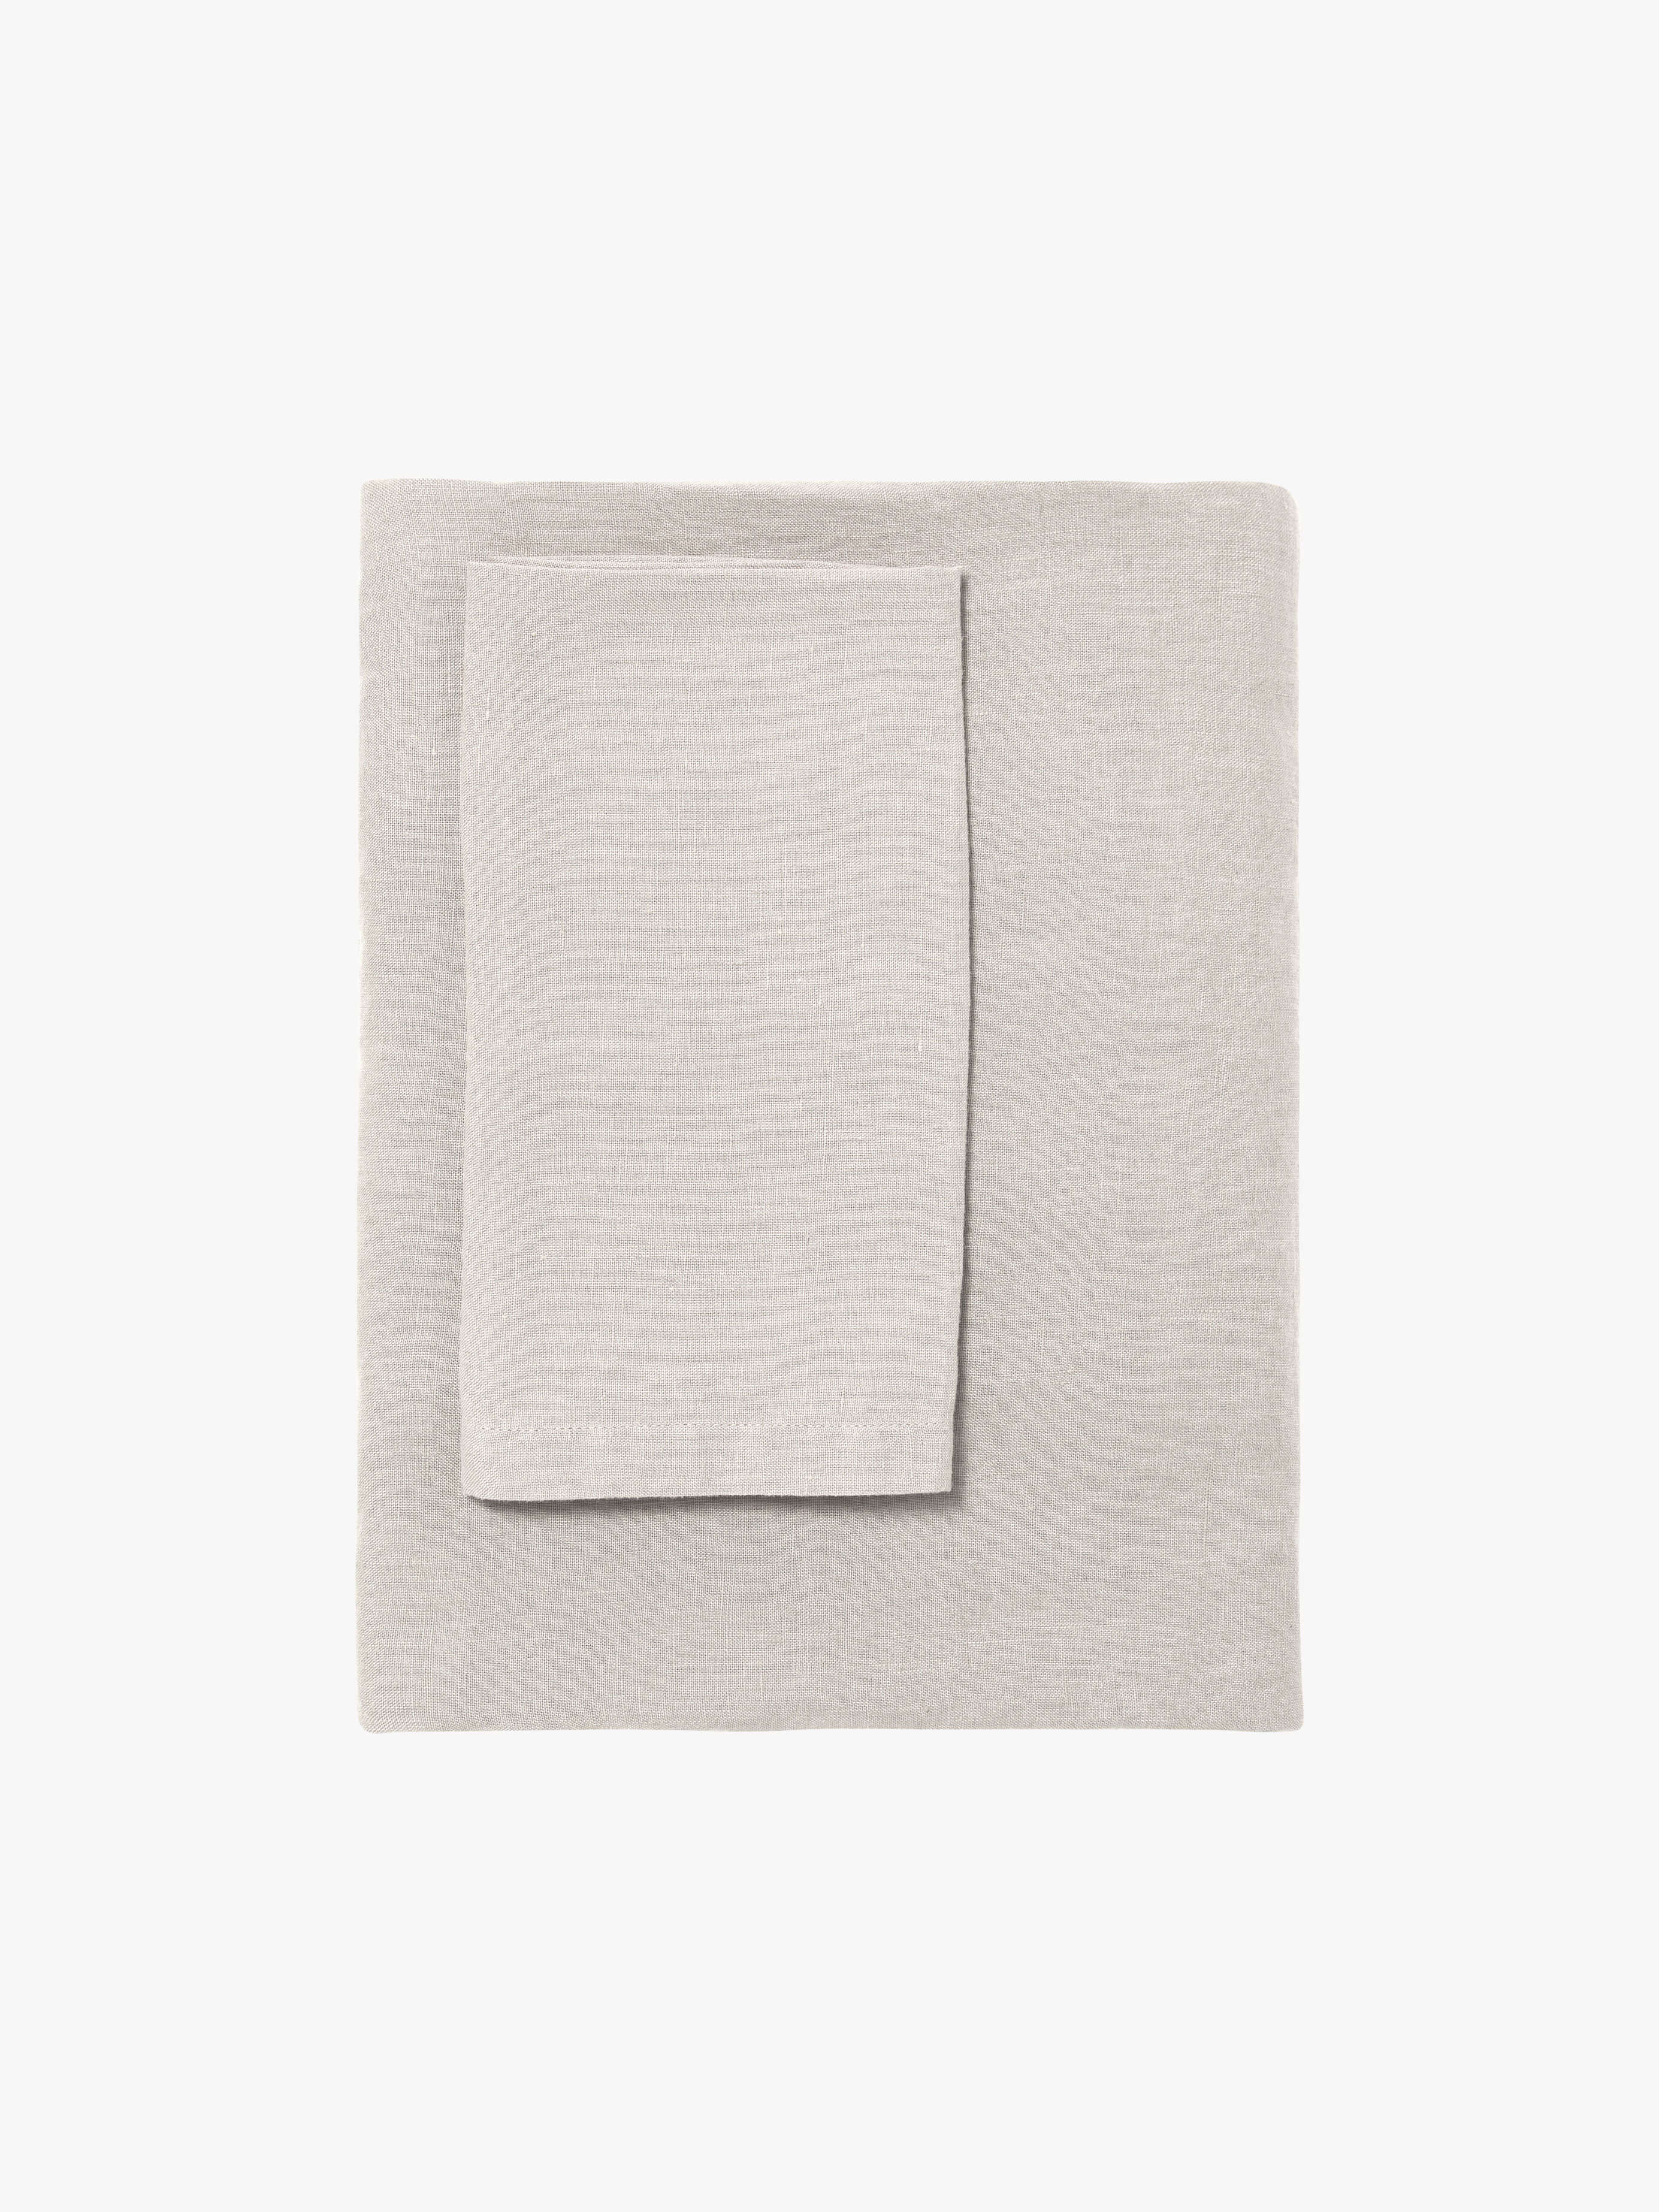 Moss Oatmeal French Linen Table Cloth